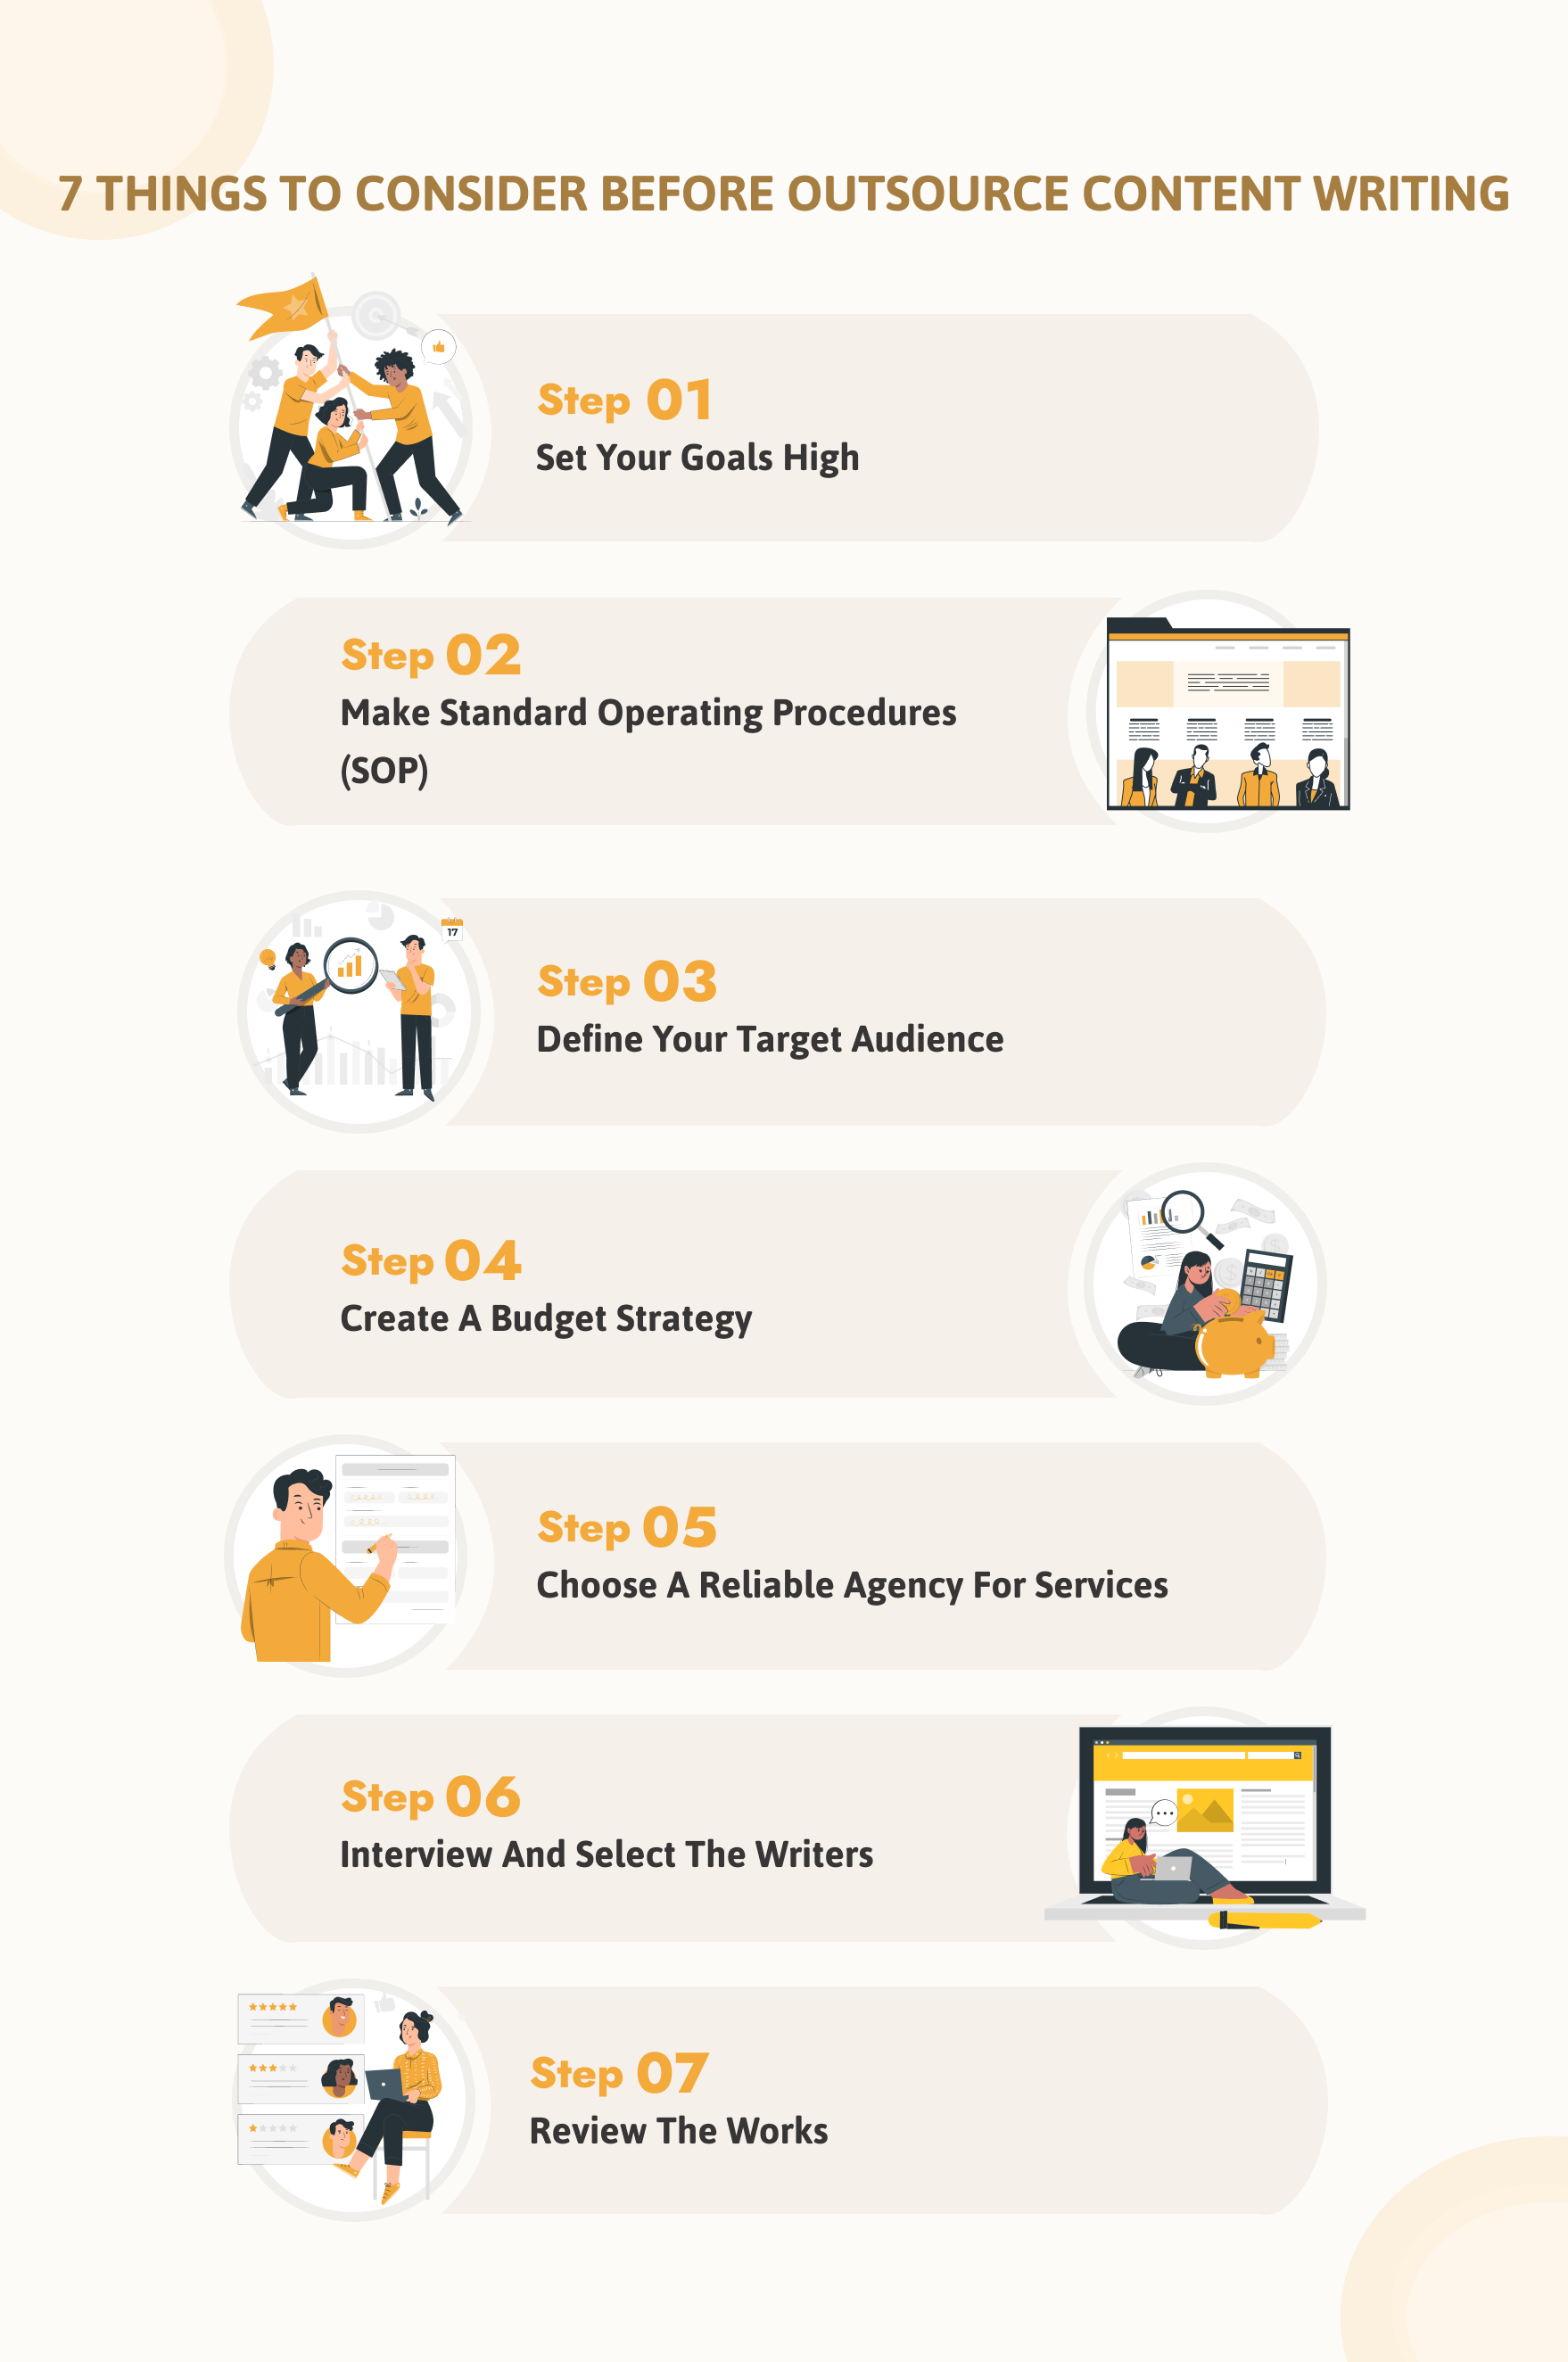 Things to consider before outsource content writing - Infographic